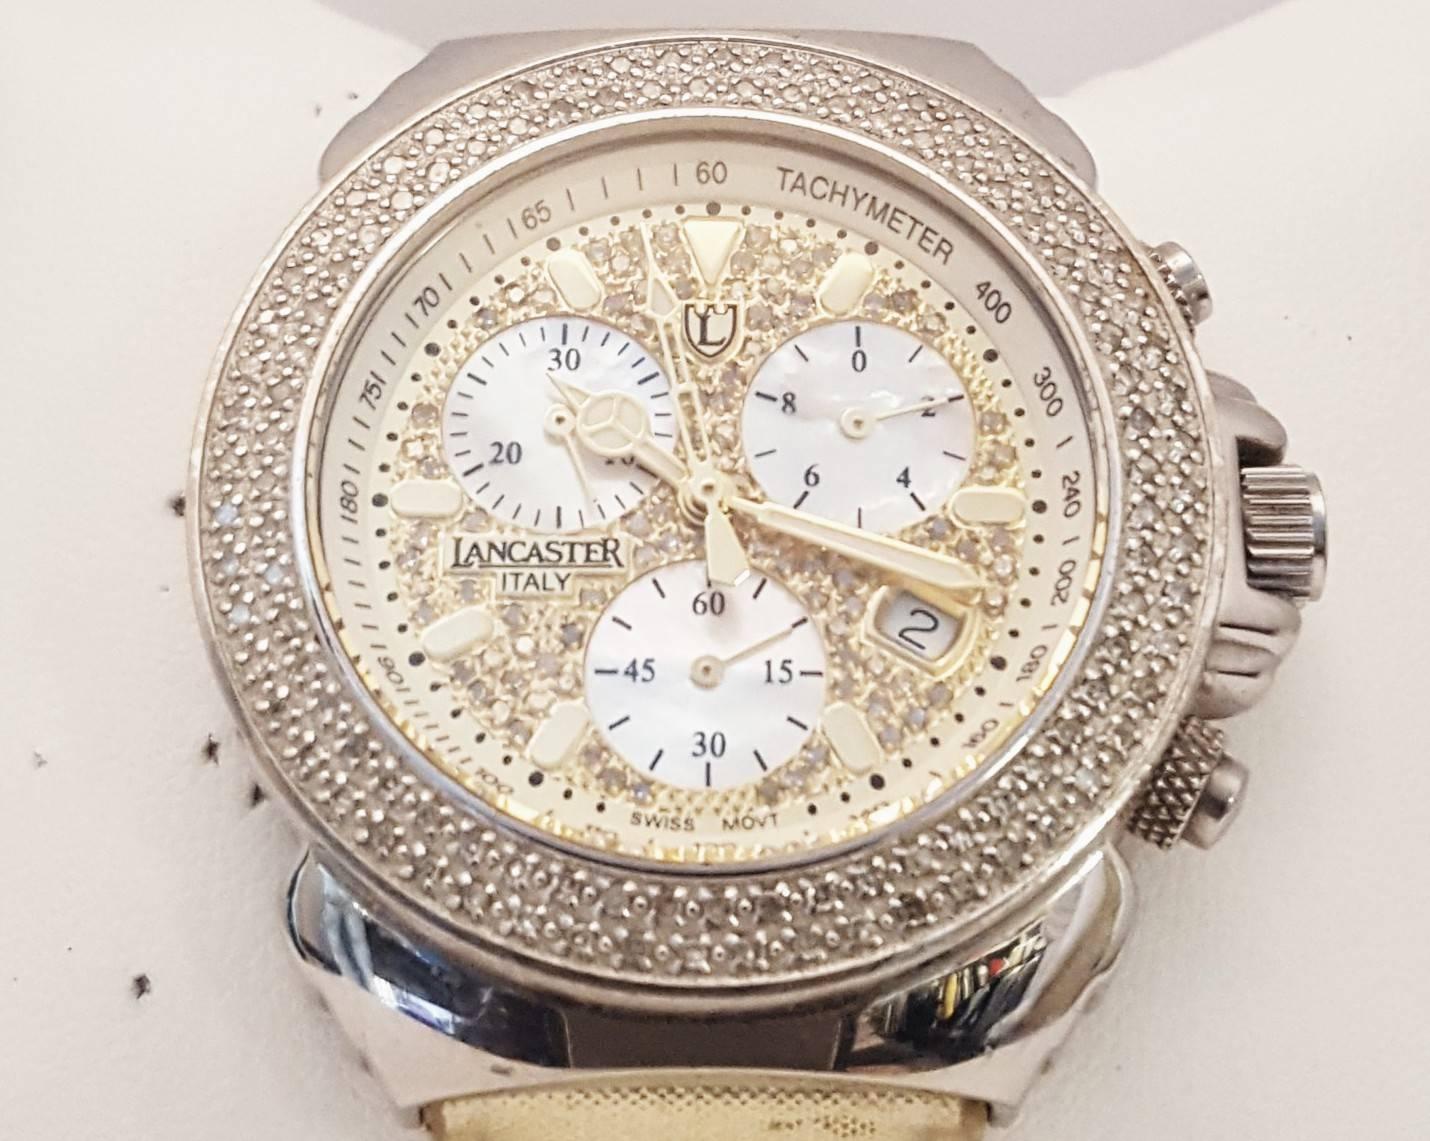 Limited Edition beauty purchased at Bevilacqua Gioielli in Venice, Italy.  This Lancaster stainless steel chronograph features a mother of pearl diamond dial and diamond bezel.  Total weight of diamond is 1.75 carats.  Water resistant to 5 ATM,